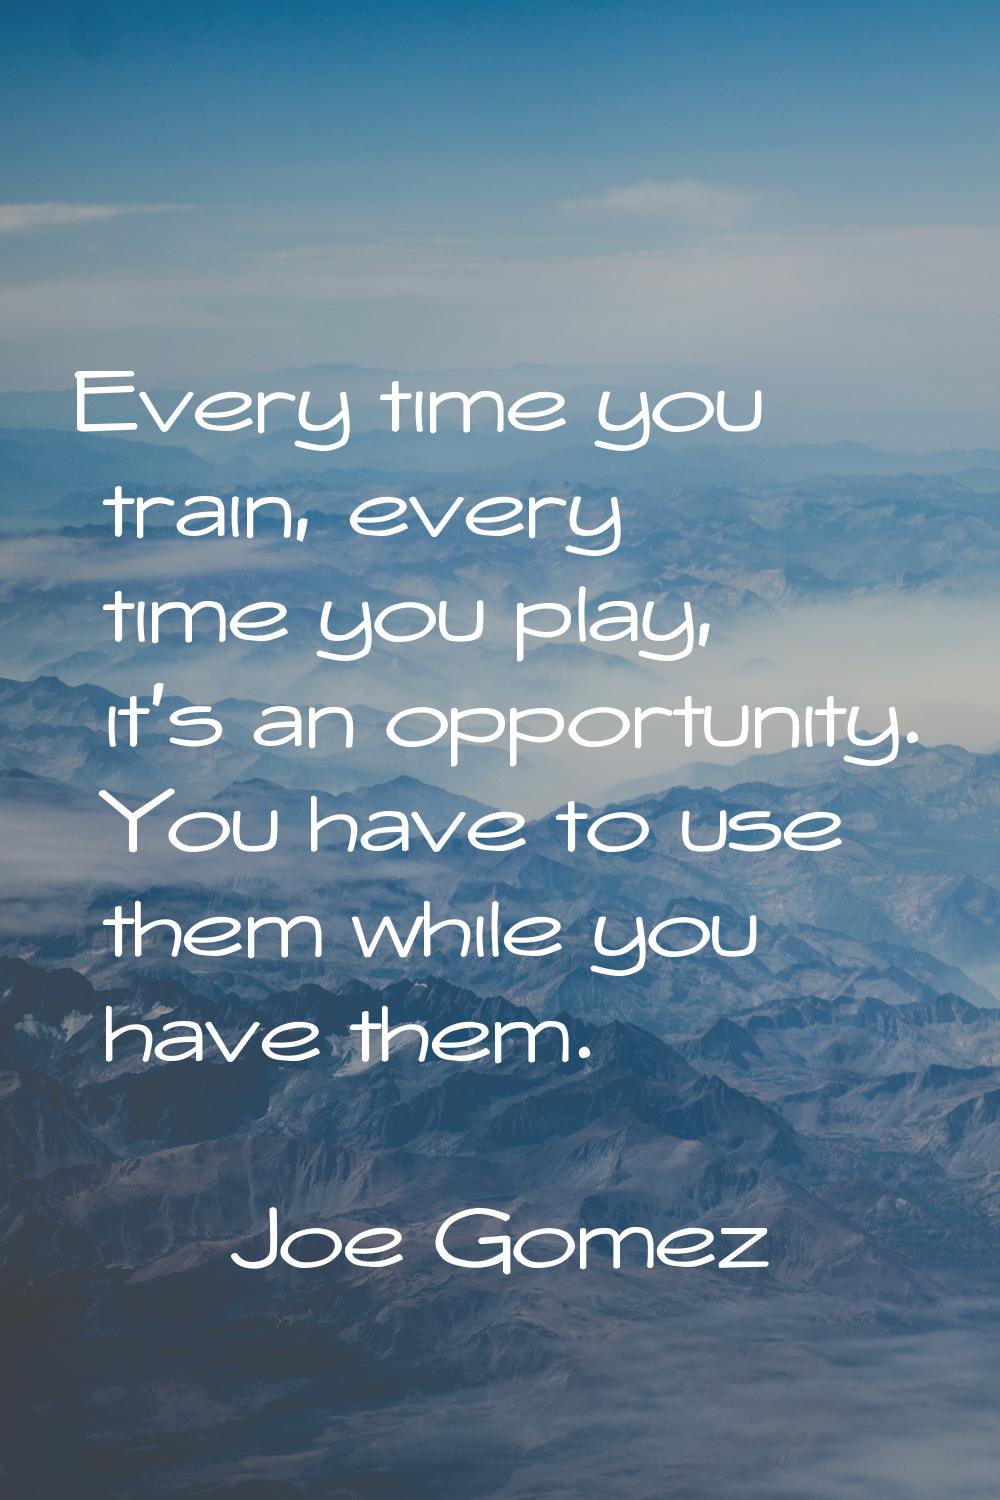 Every time you train, every time you play, it's an opportunity. You have to use them while you have